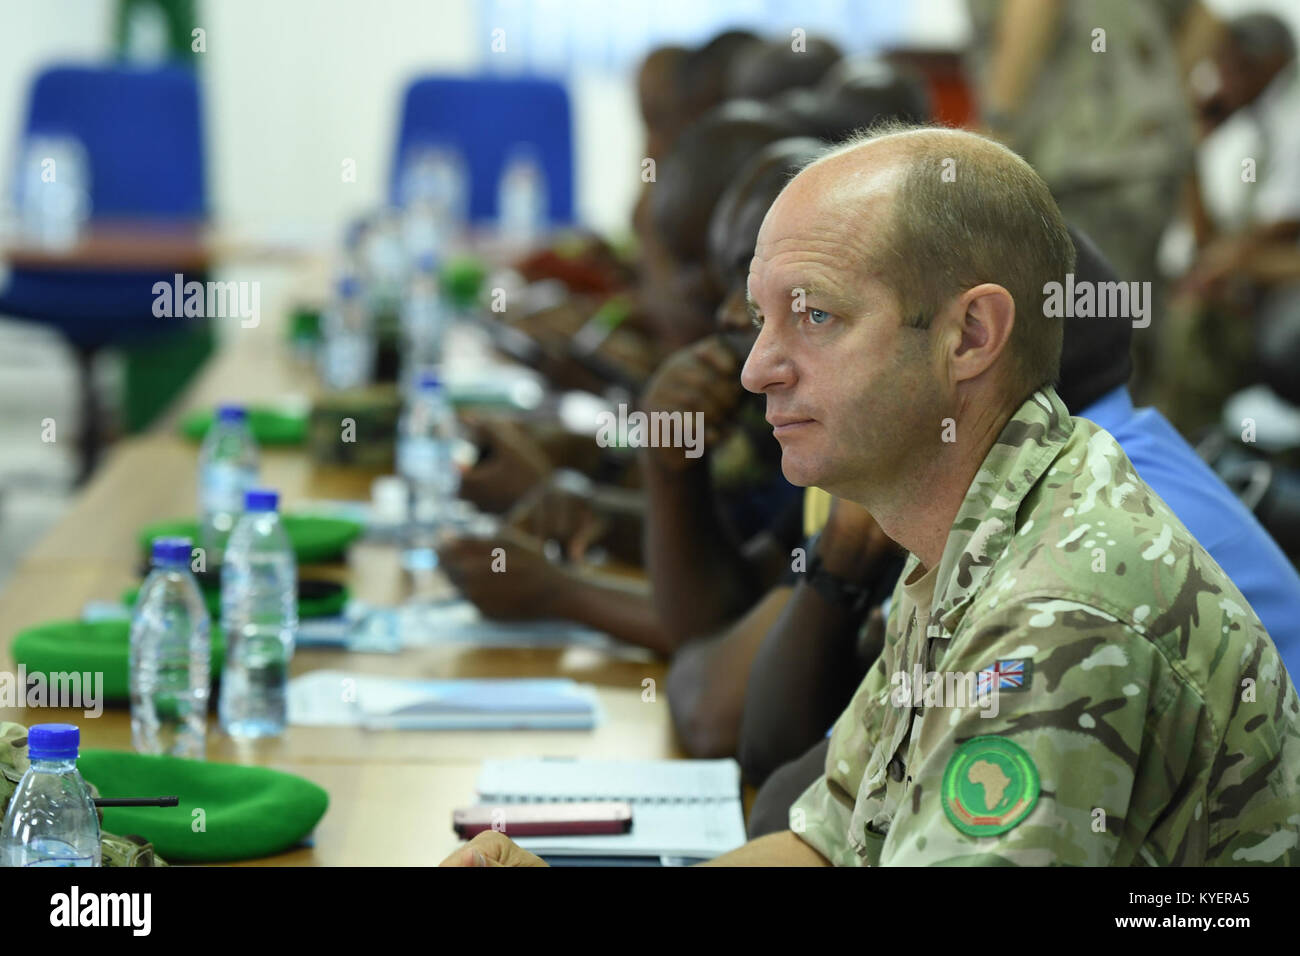 Participants attend the opening of a Joint AMISOM and Federal Government of Somalia (FGS) conference in Mogadishu, Somalia, on July 24, 2017. AMISOM Photo/ Omar Abdisalan Stock Photo